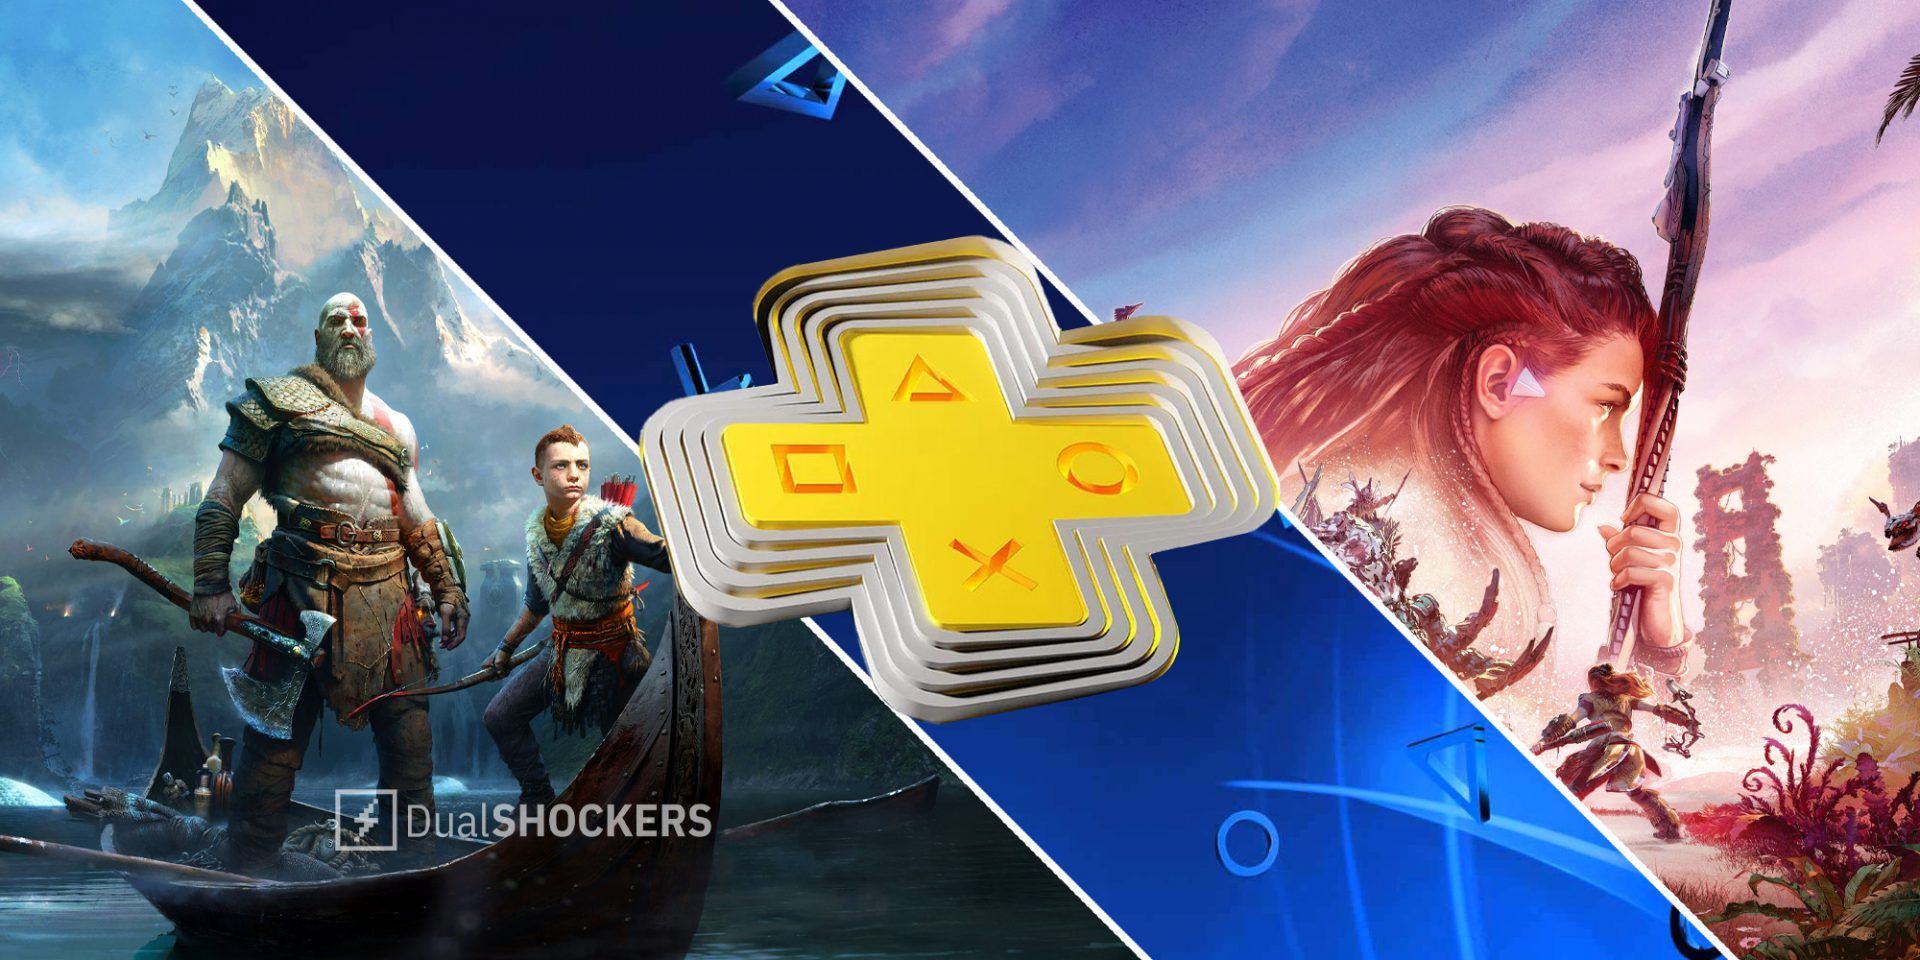 PlayStation Plus: Everything you need to know (2023) - Android Authority